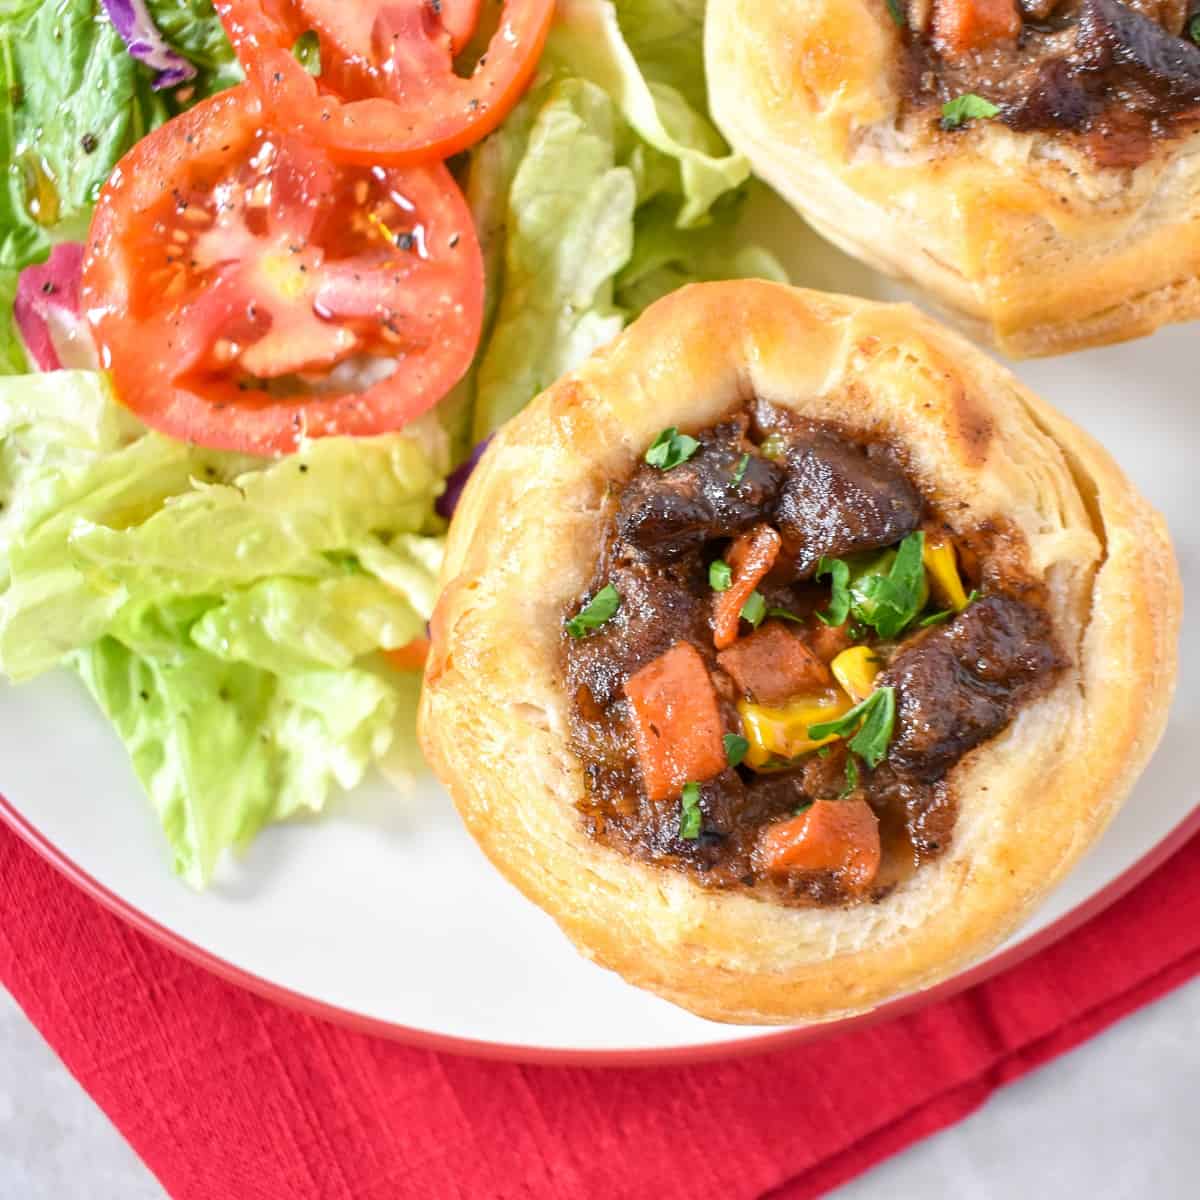 Two mini beef pot pies served on a white plate with a side salad.